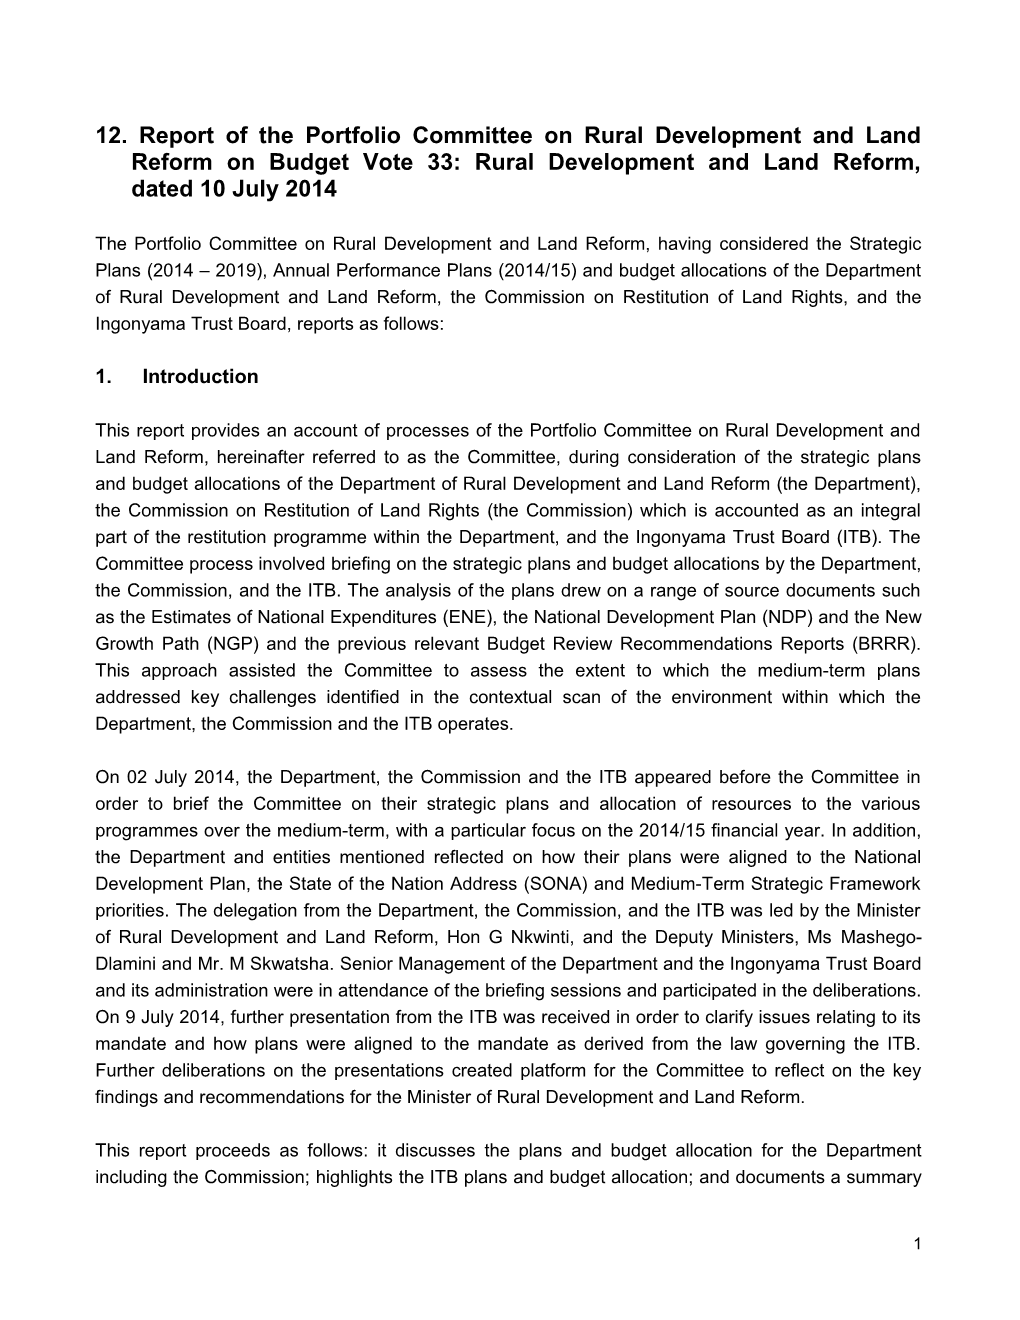 2.The Department of Rural Development and Land Reform